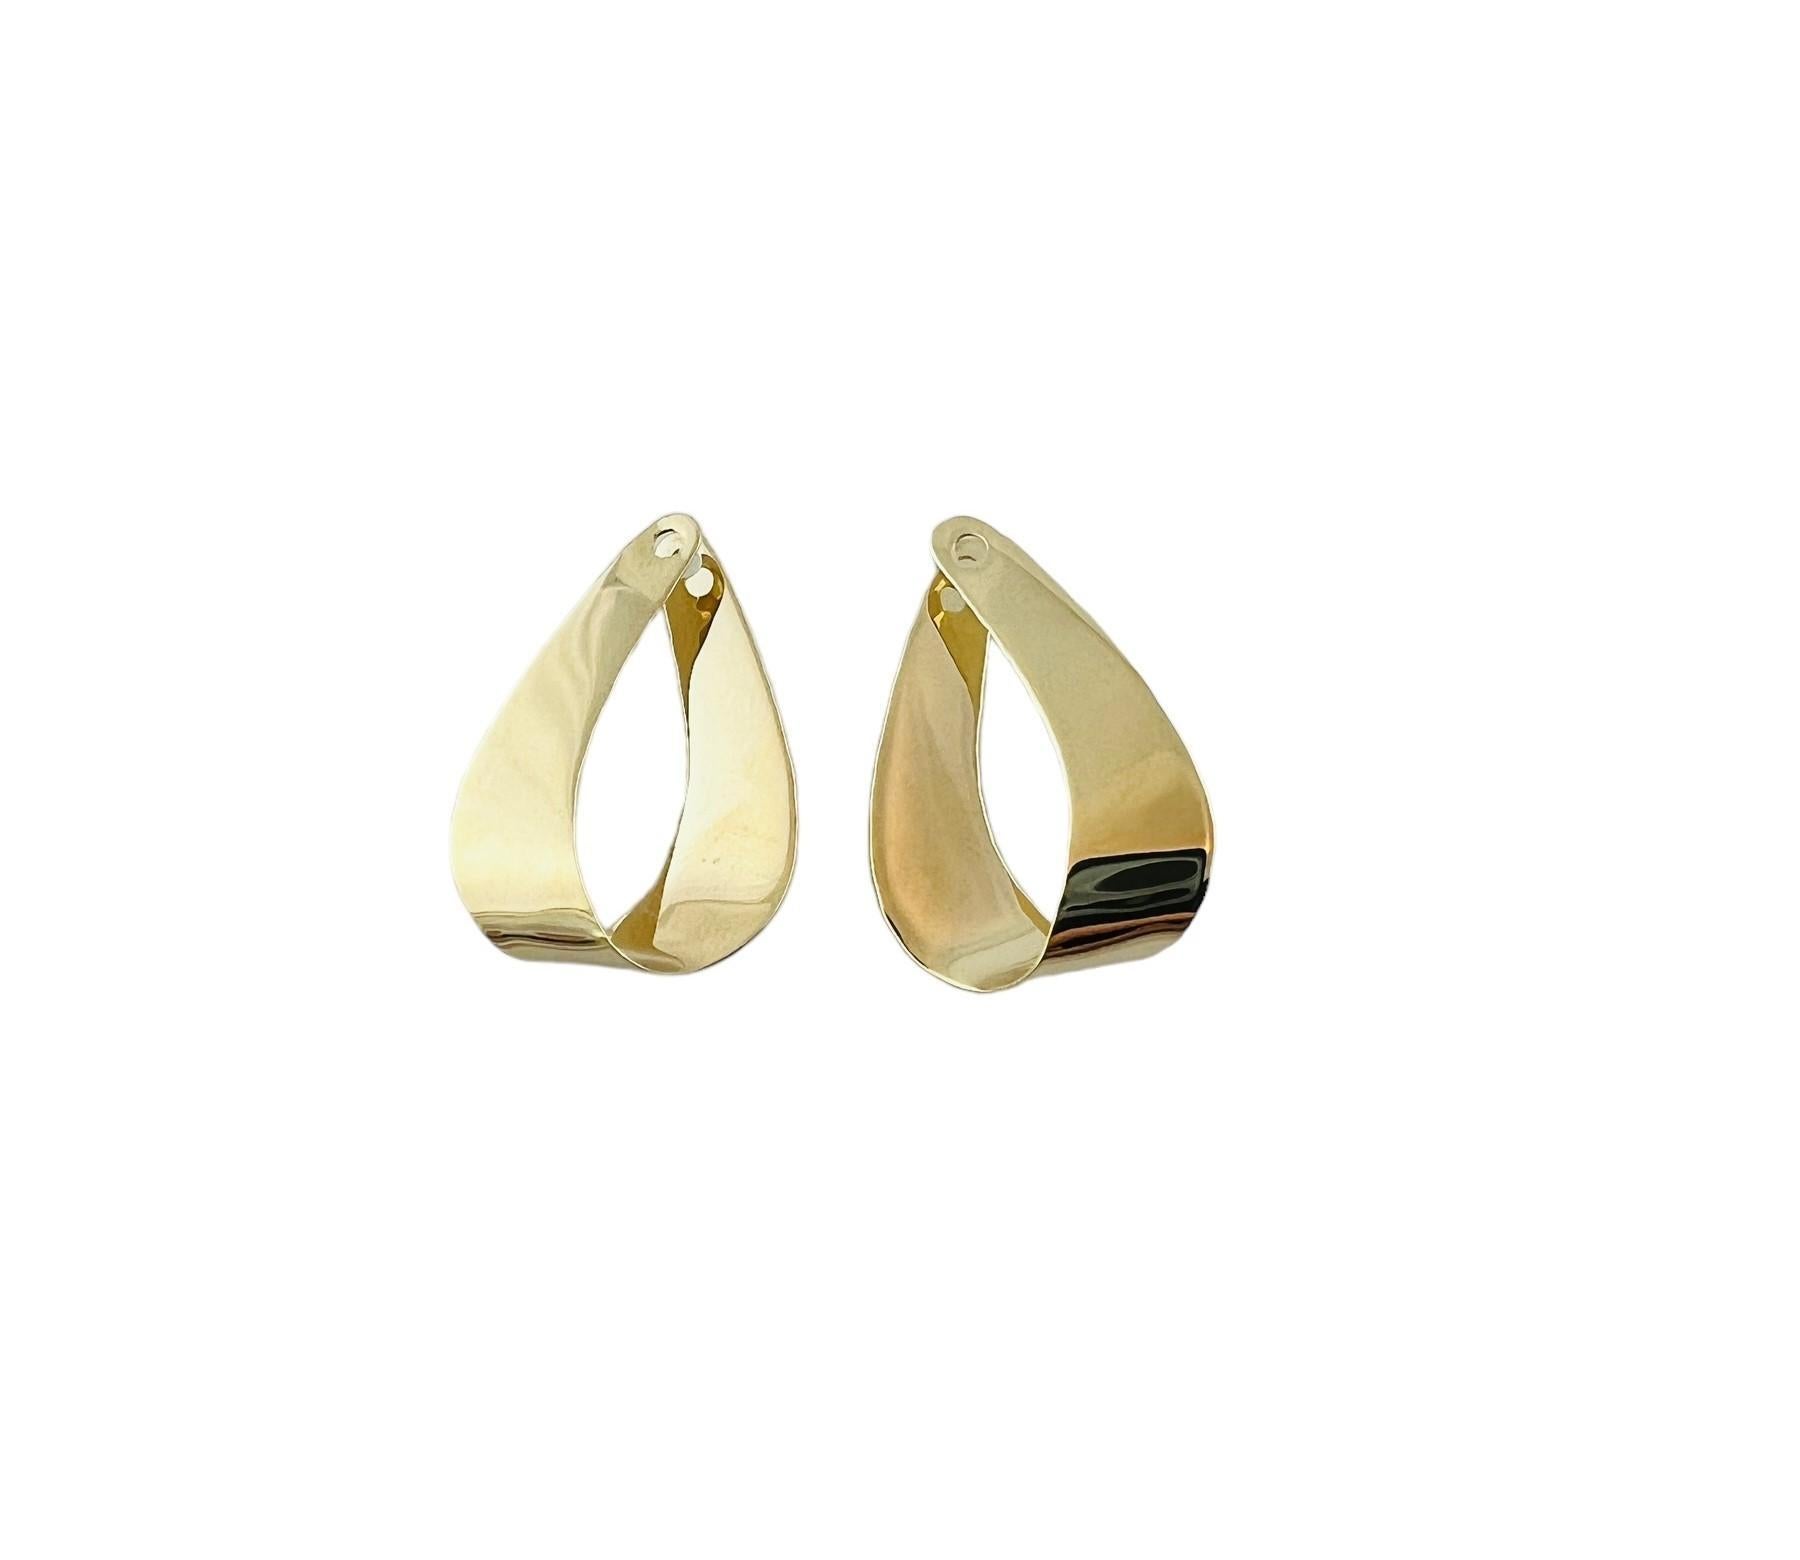 James Avery 14K Yellow Gold Oval Dangle Earring Jackets

These beautiful, polished twisted oval earring jackets are set in 14k yellow gold

One side has a smooth polished design, while the other has a hammered finish

Jackets are approx. 25.8mm in